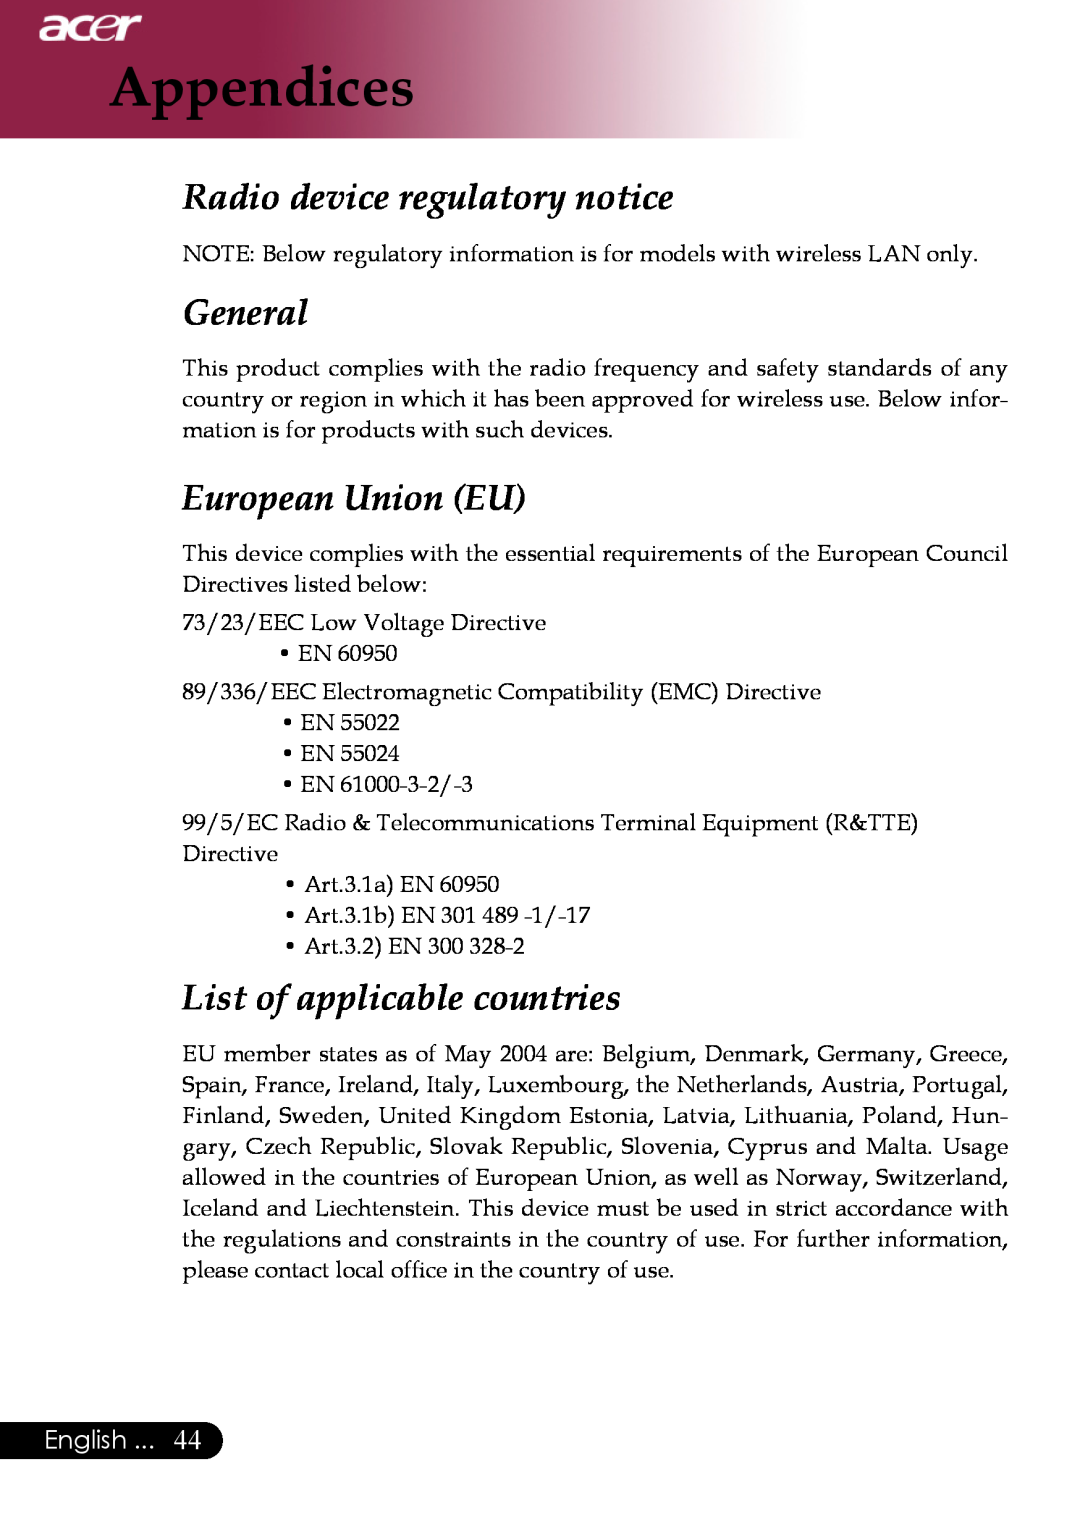 Acer XD1270 Radio device regulatory notice, General, European Union EU, List of applicable countries, Appendices, English 